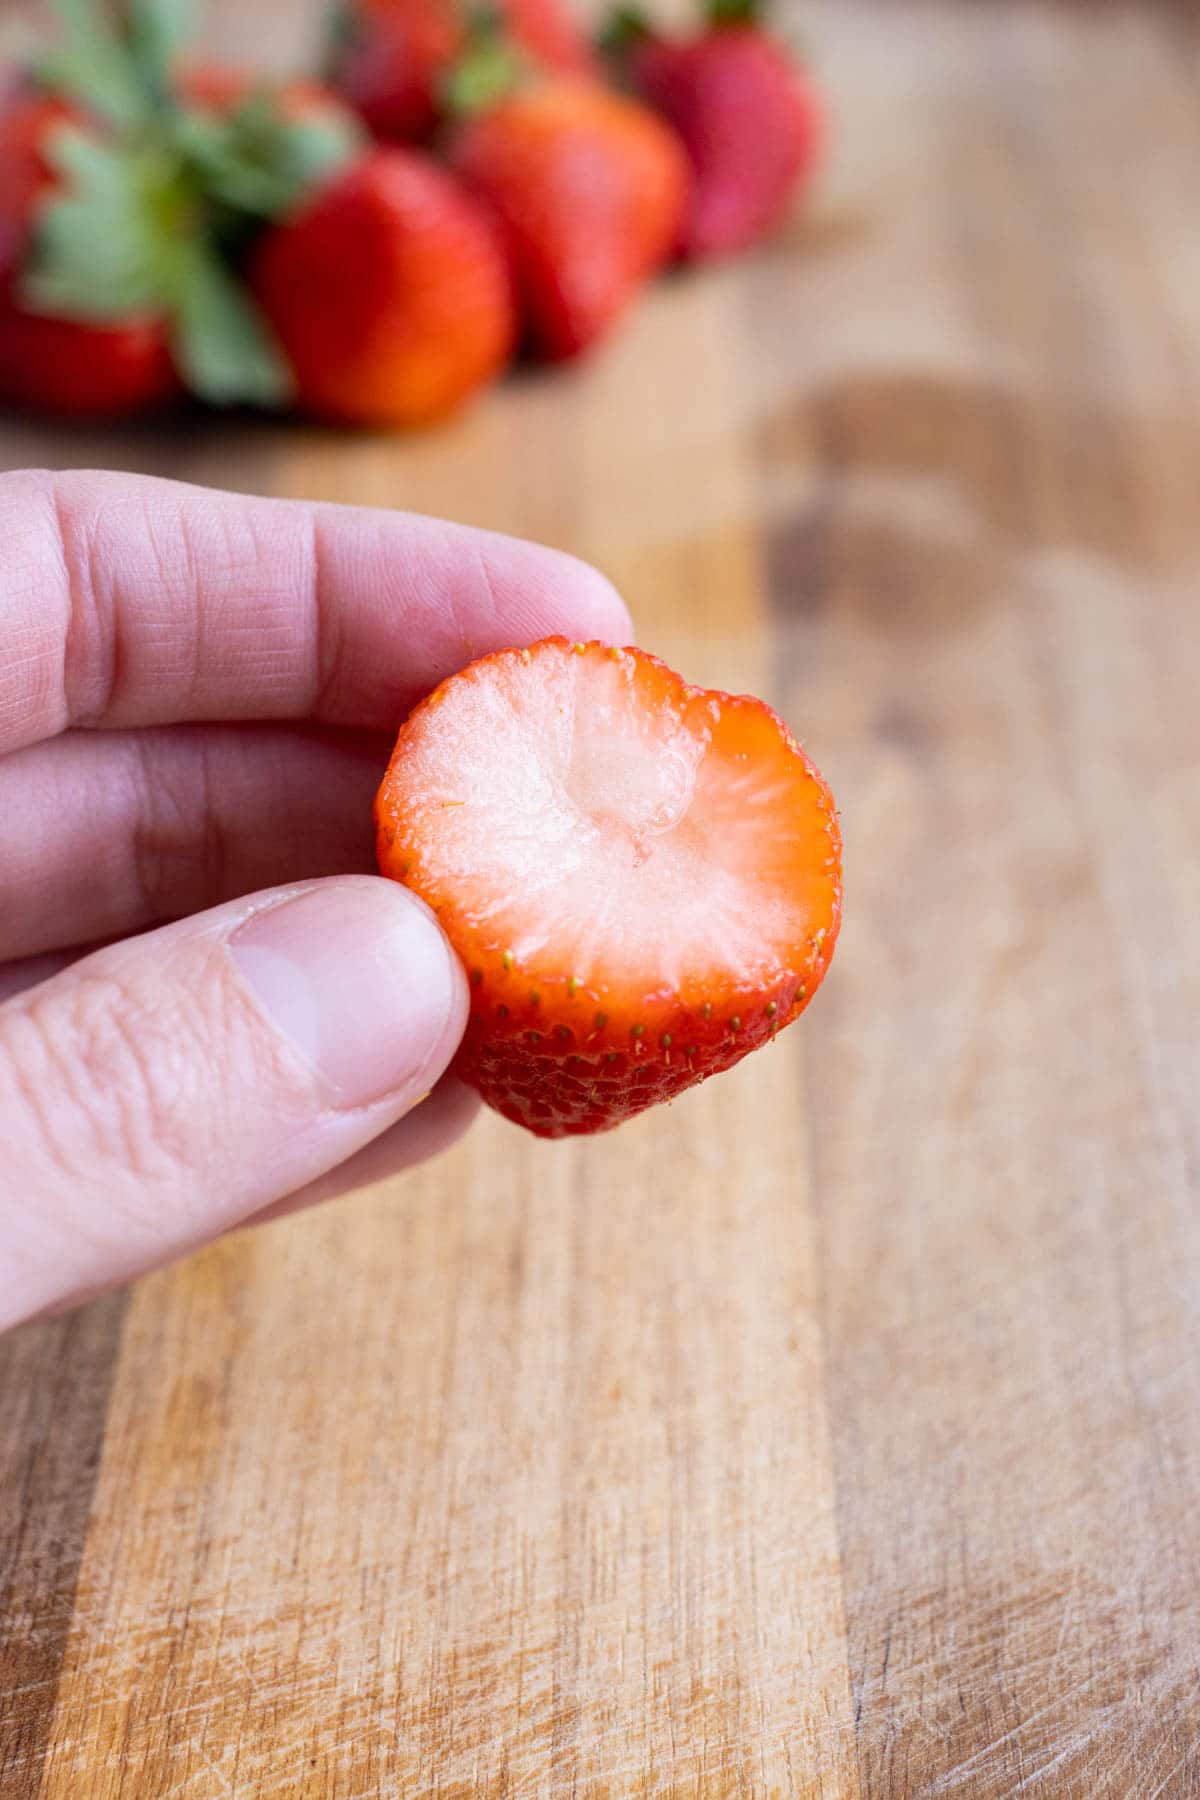 Stem is removed from the strawberry.